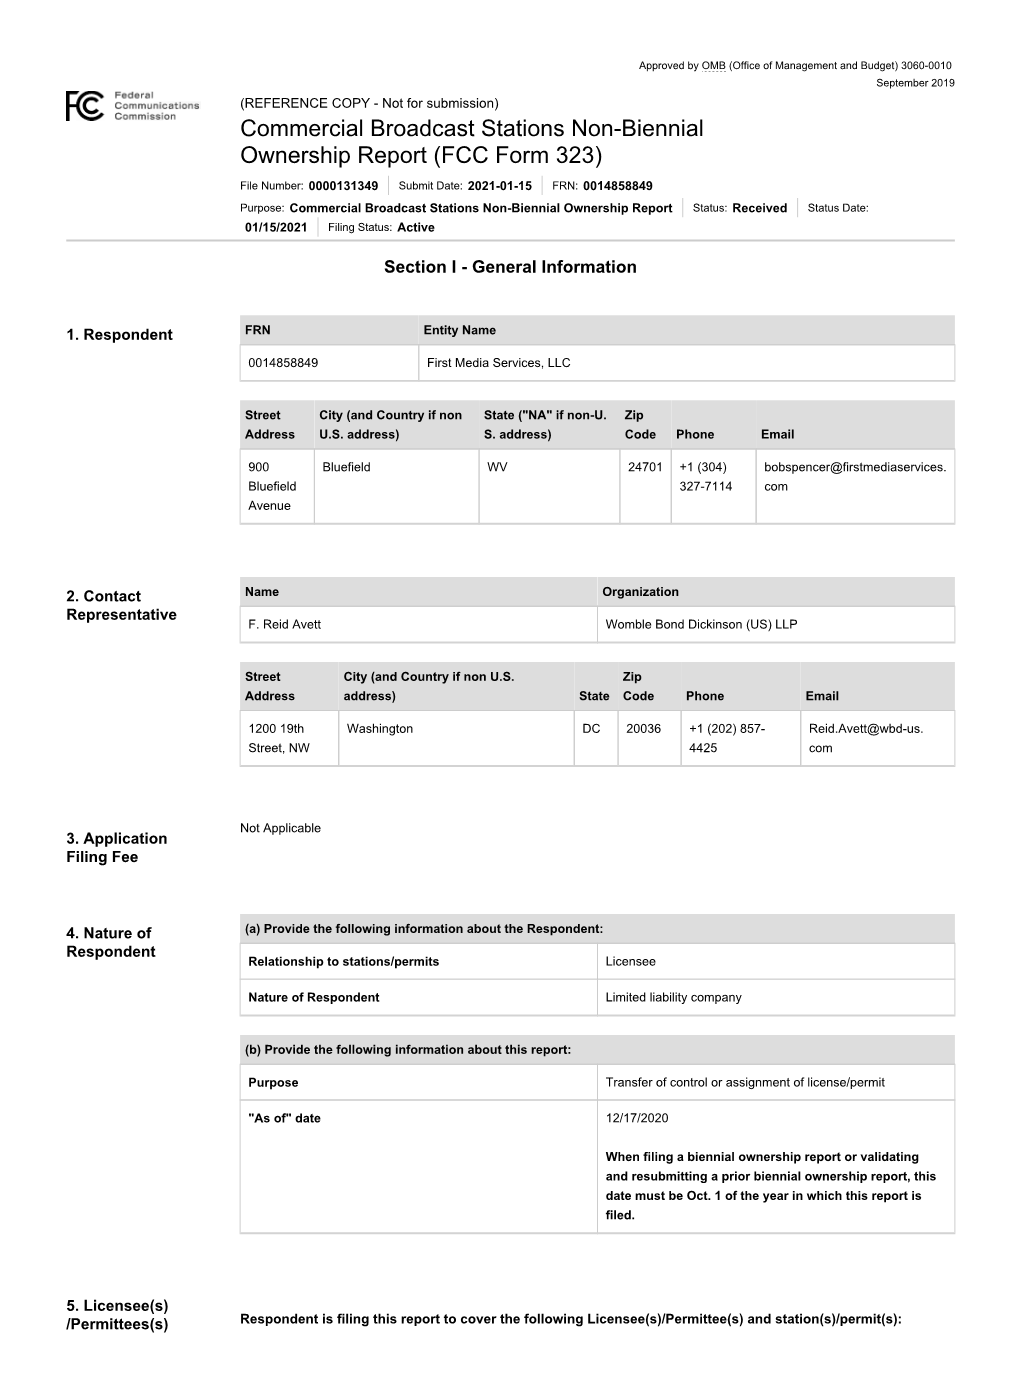 REFERENCE COPY - Not for Submission) Commercial Broadcast Stations Non-Biennial Ownership Report (FCC Form 323)